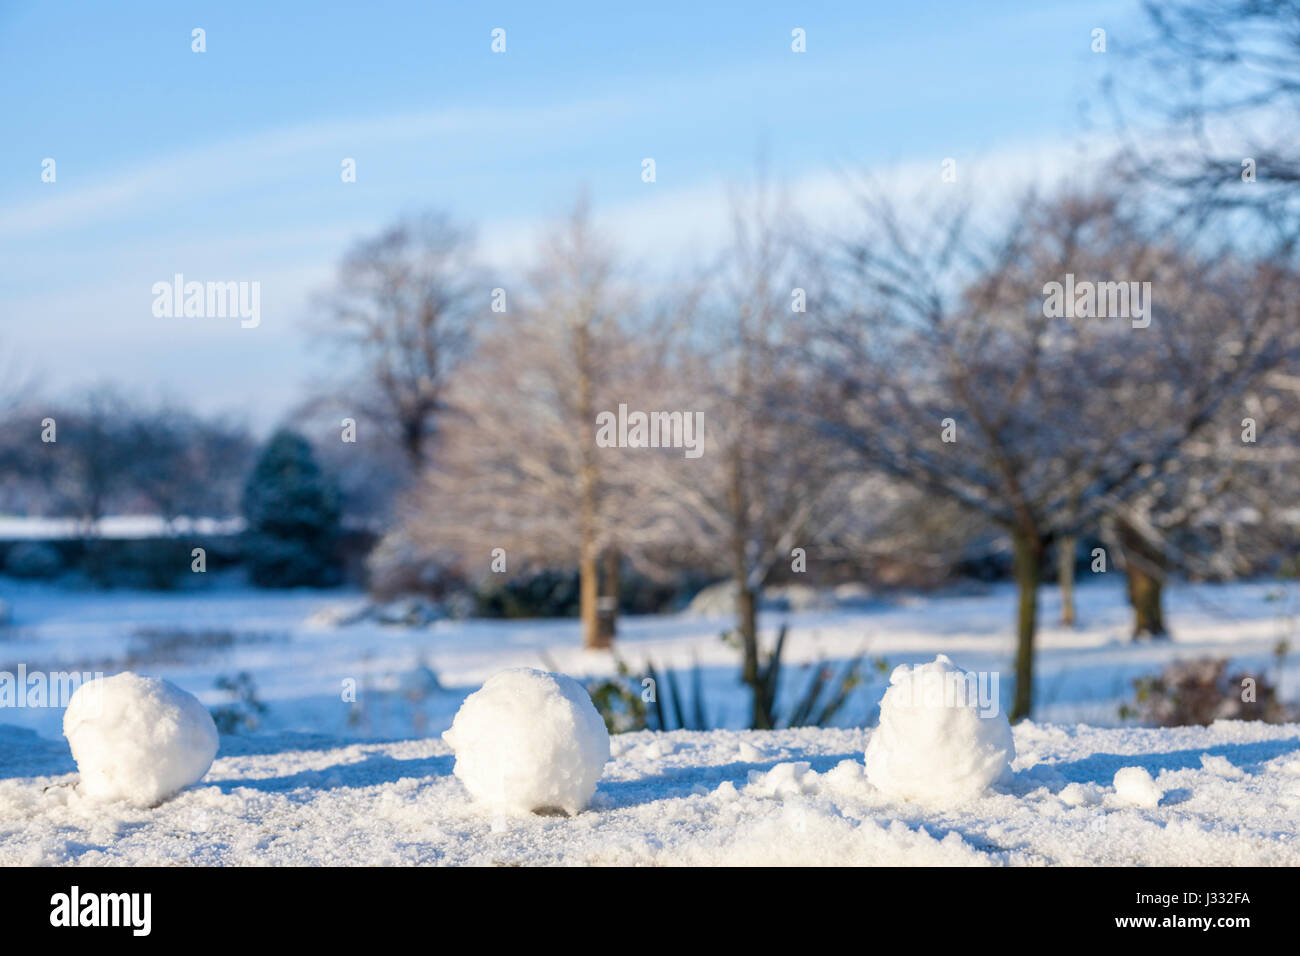 Snowballs lined up on a wall, England, UK Stock Photo